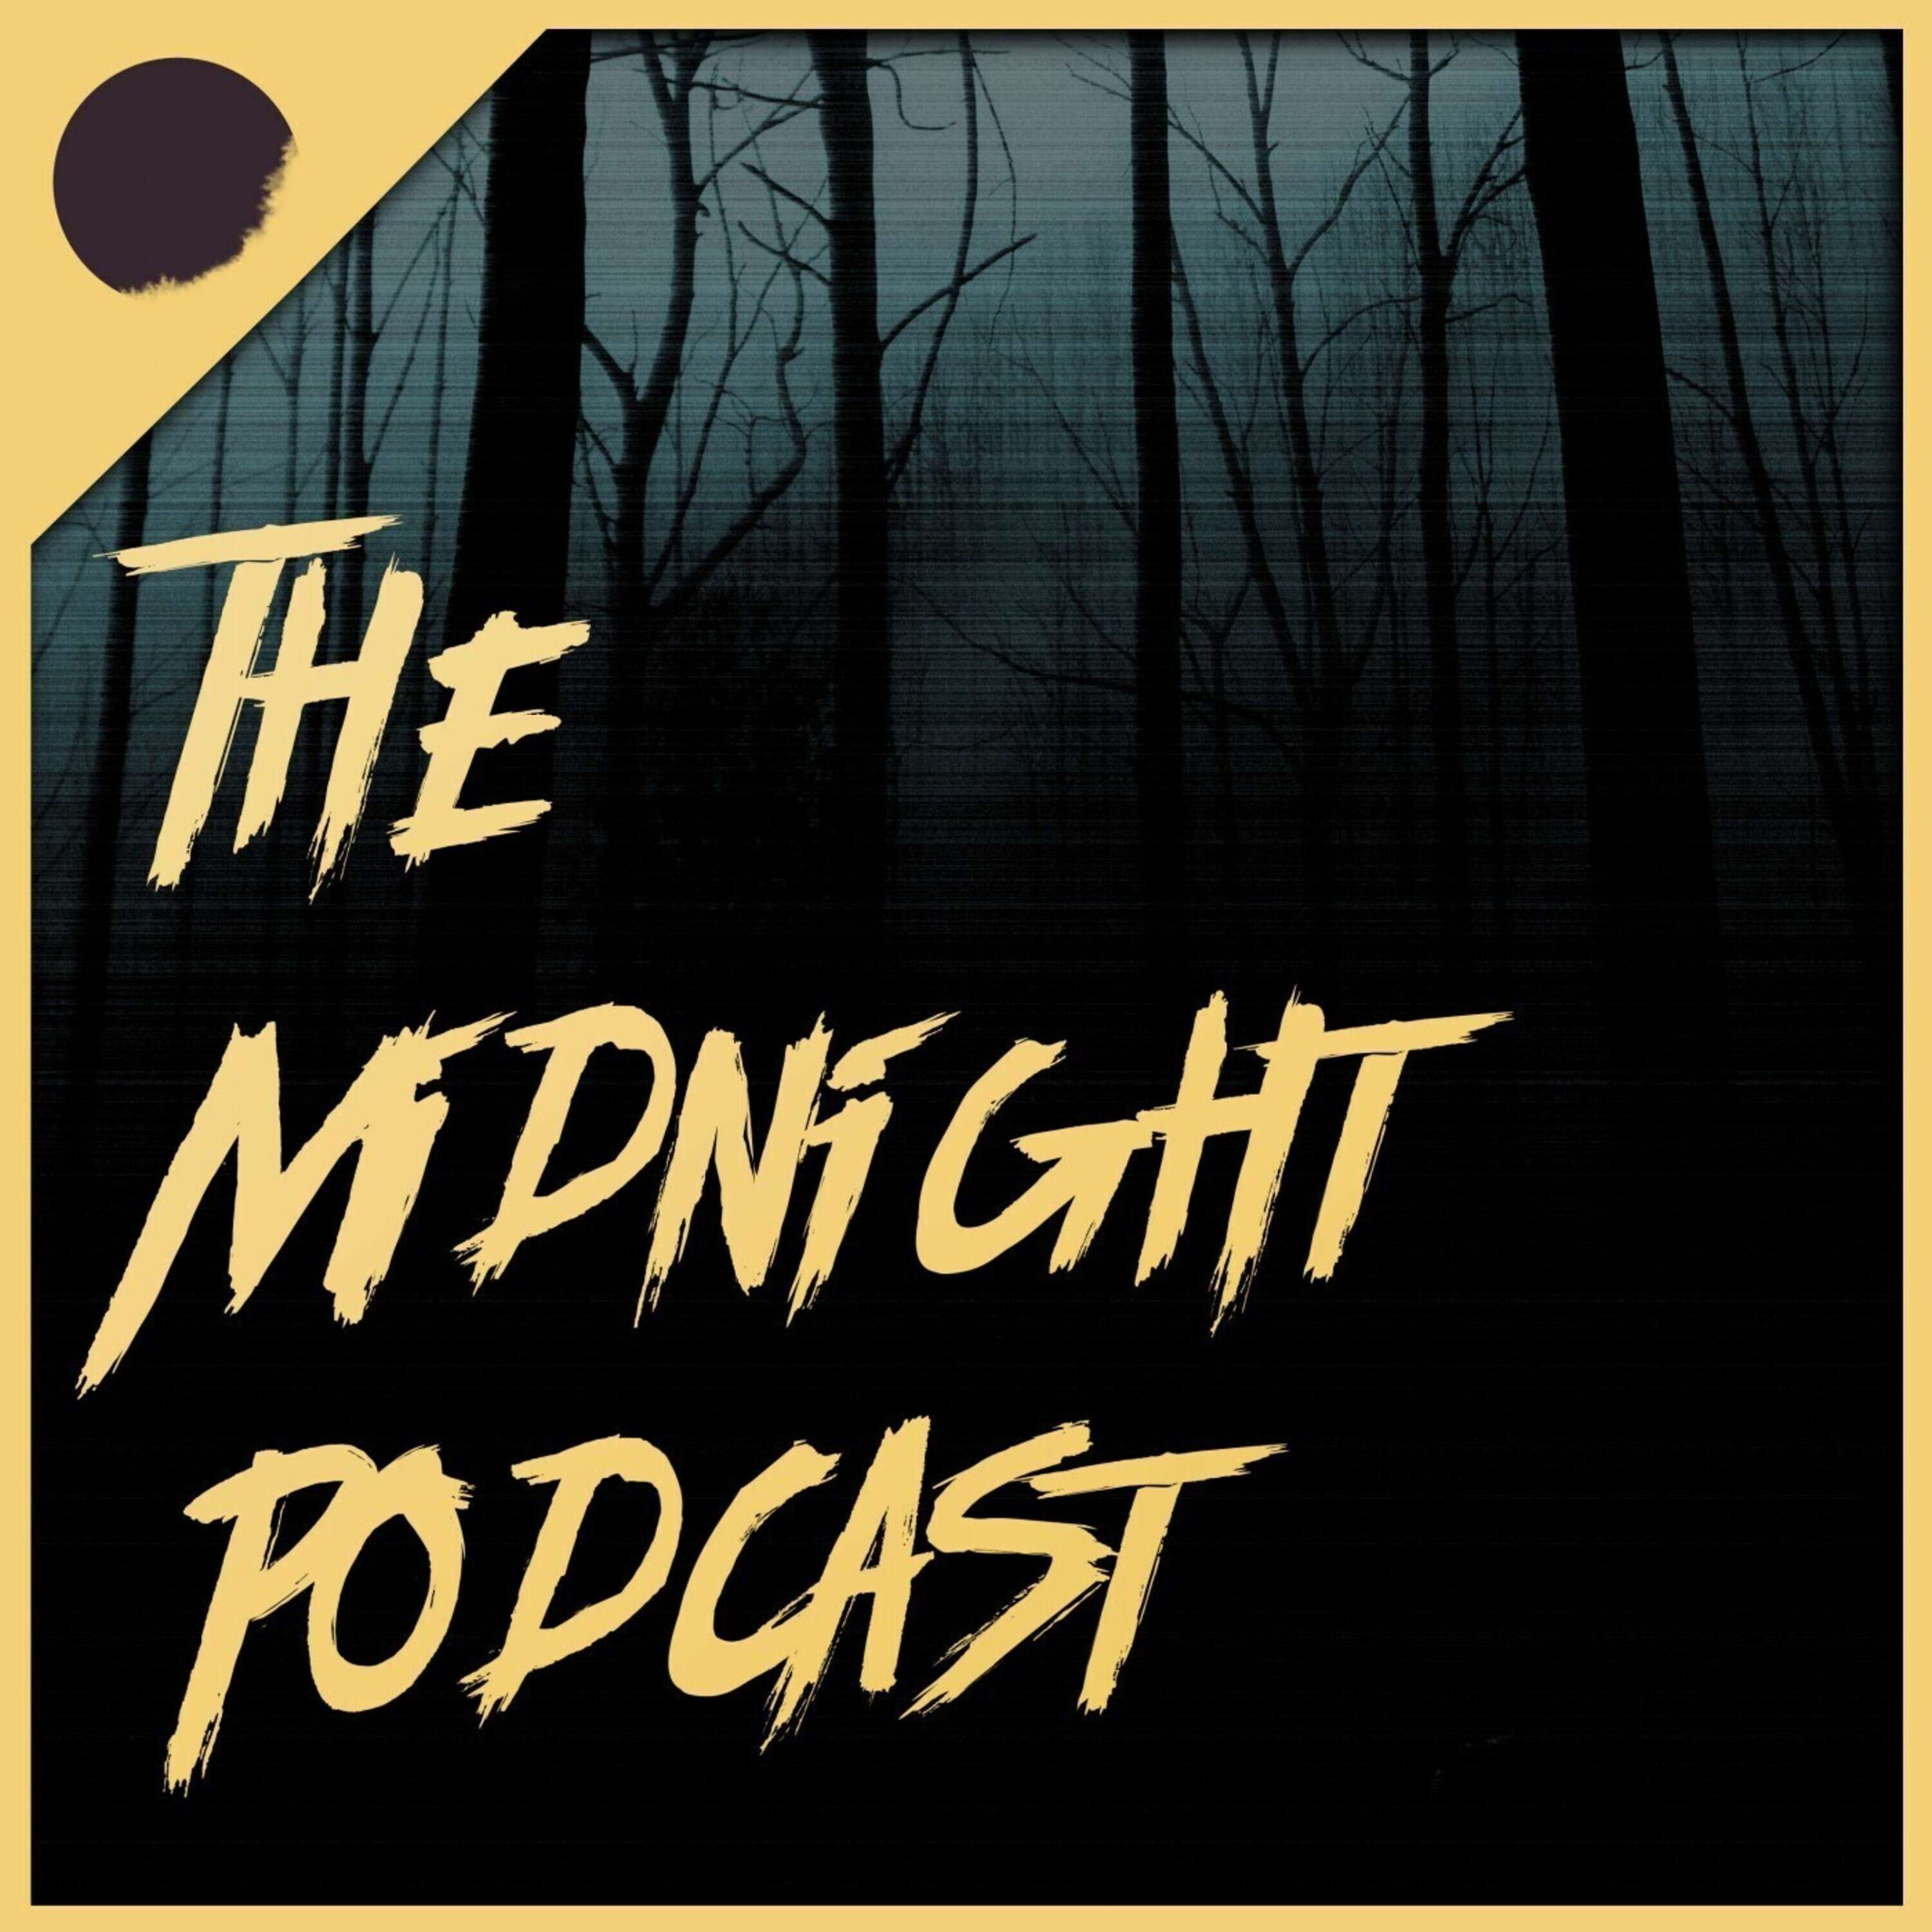 Episode 162 | Two Kidnapping Stories | Fiction | Stories After Midnight